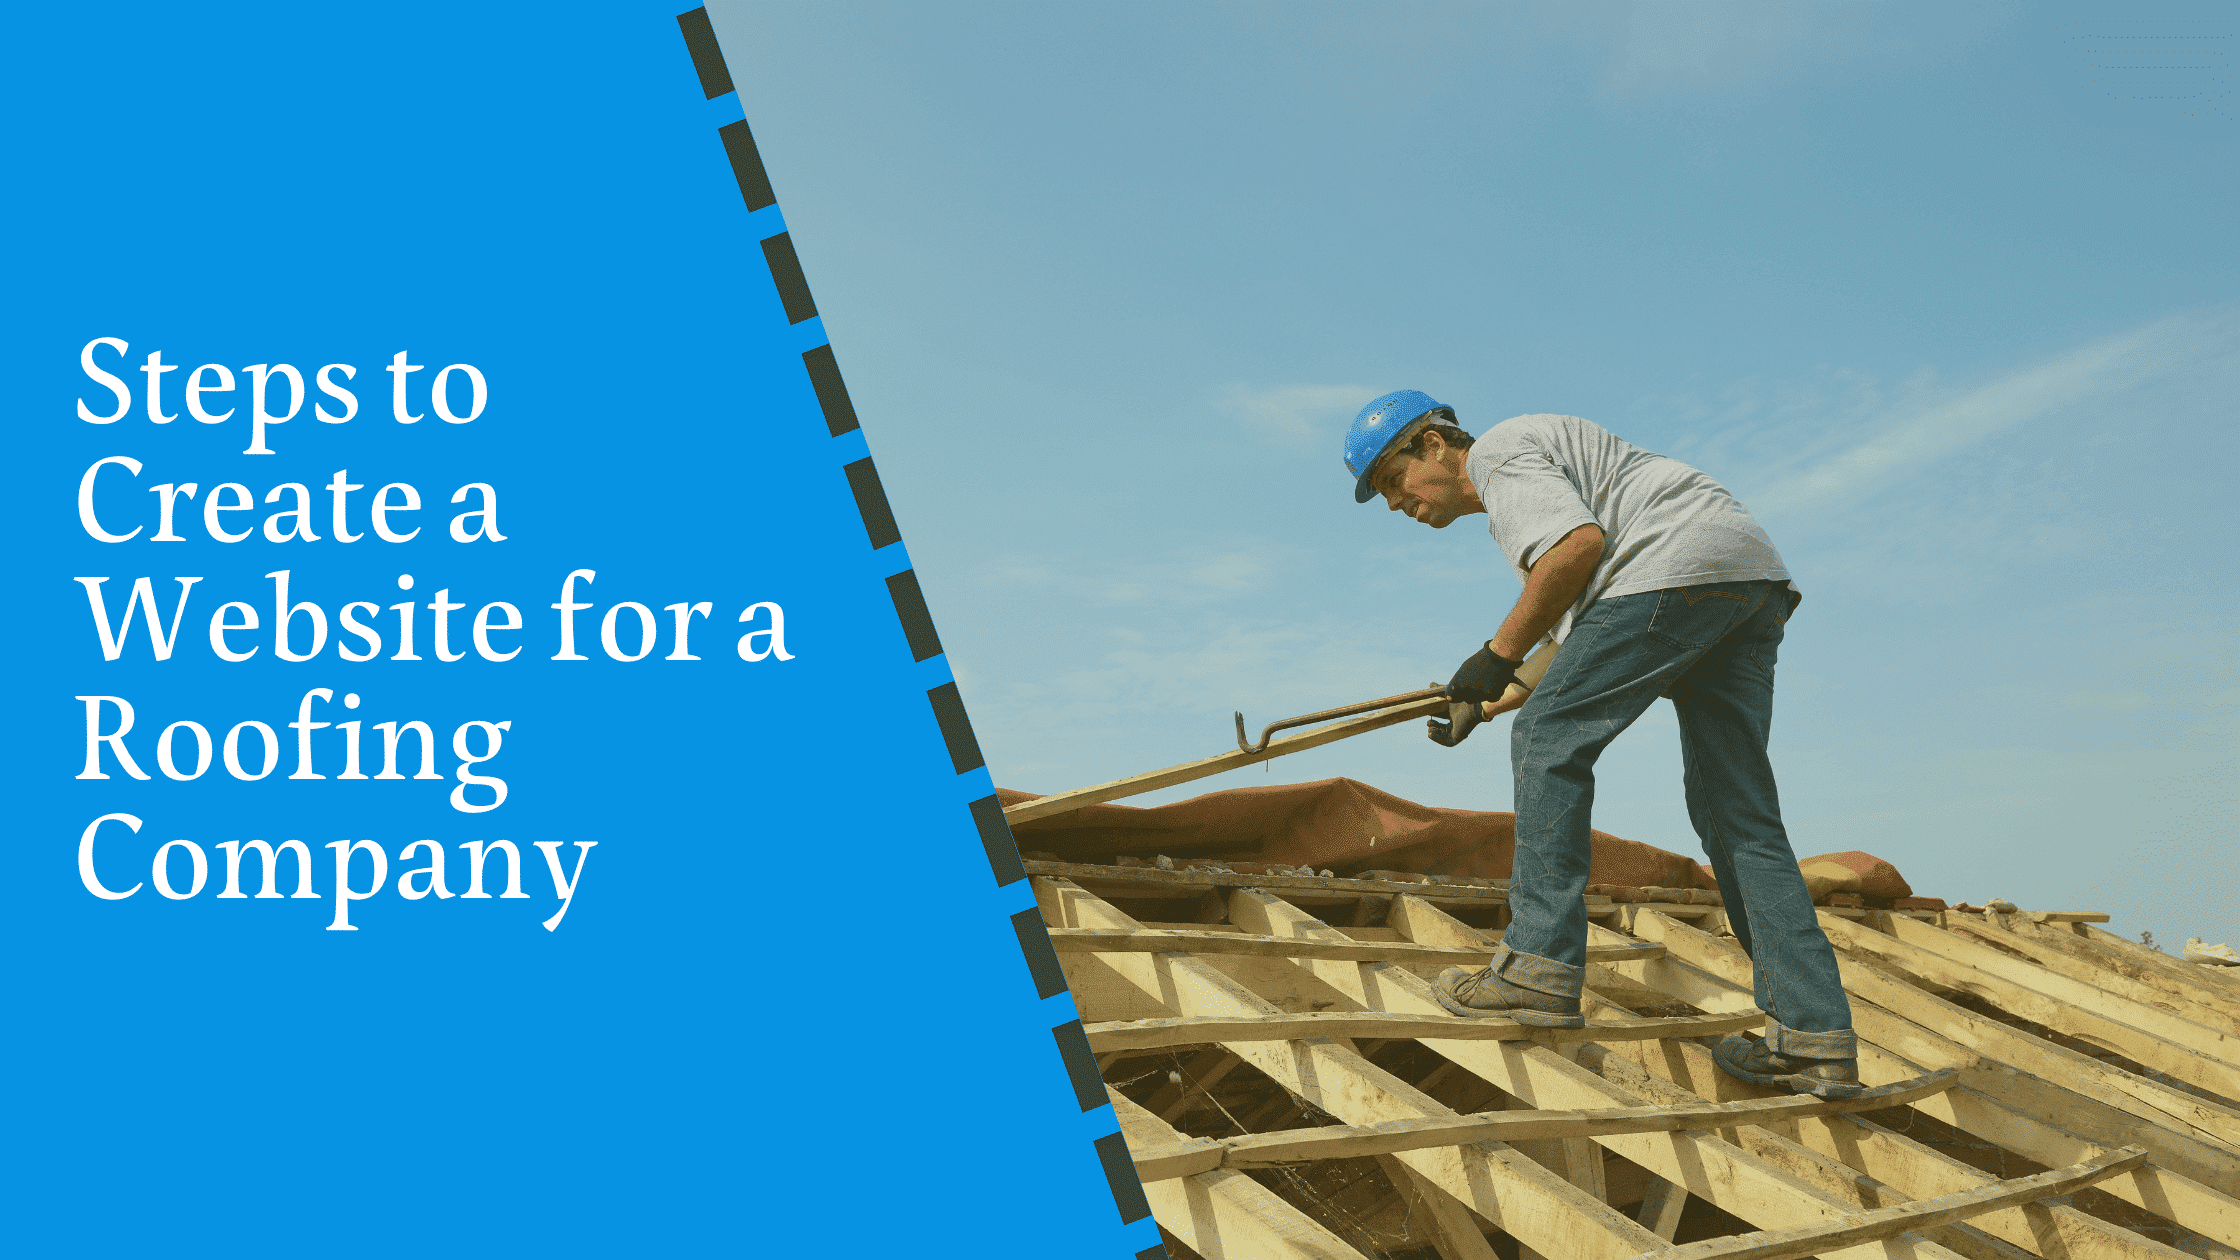 Featured image for “Steps to Create a Roofing Company Website Which Converts”